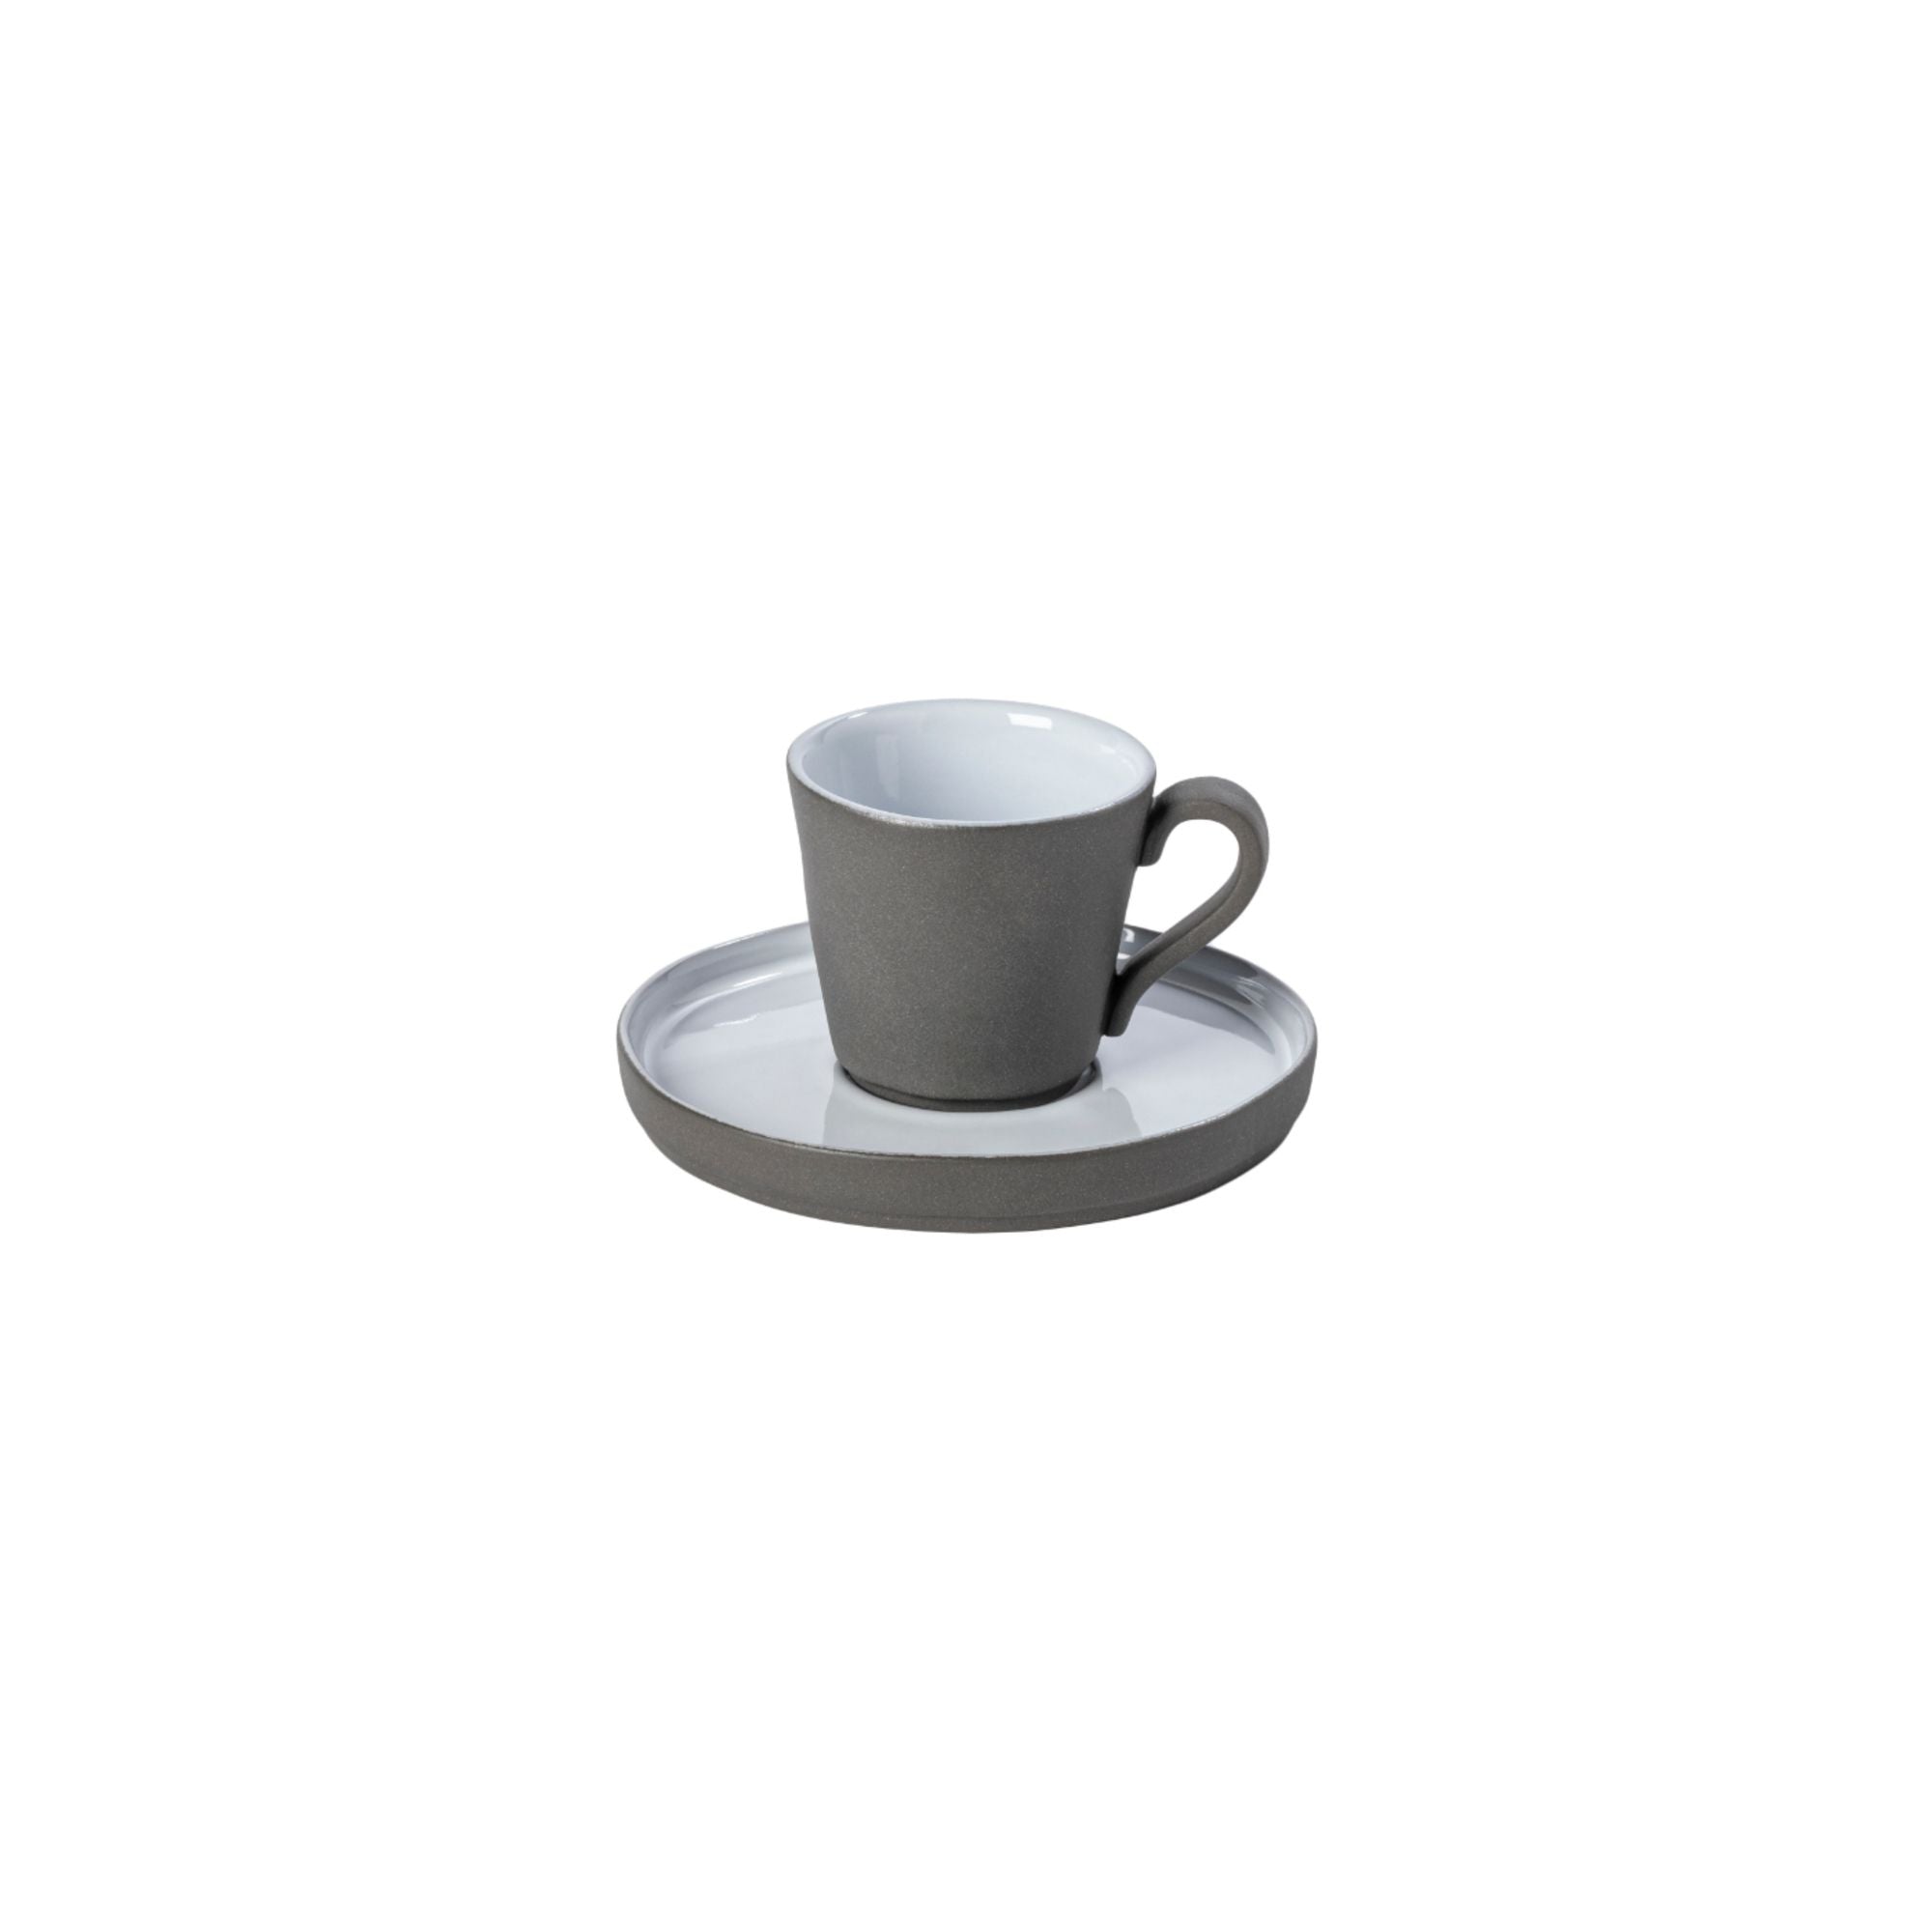 Lagoa Eco Gres Coffee Cup and Saucer 3 oz. White